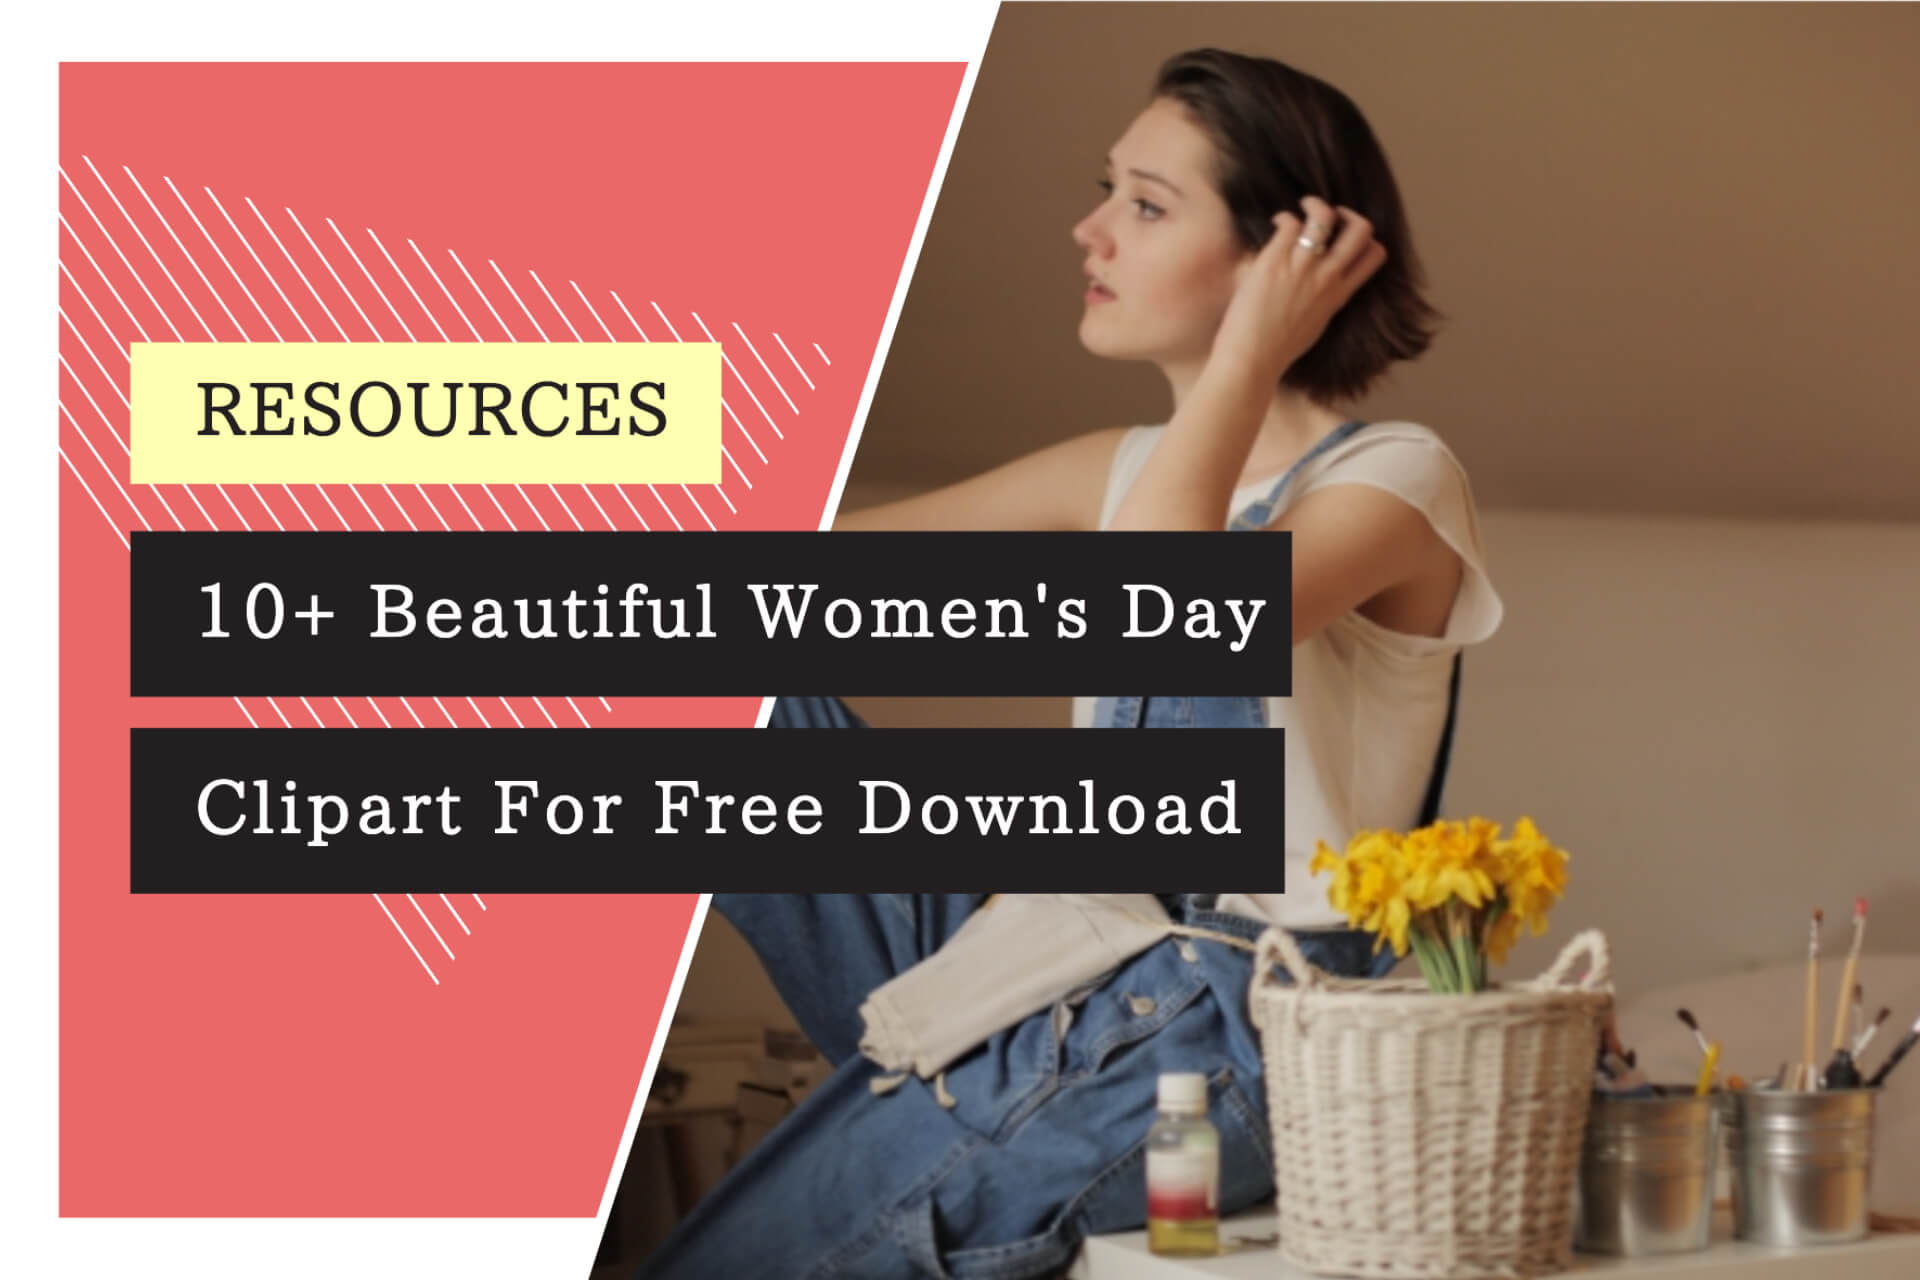 10+ Beautiful Women’s Day Clipart For Free Download